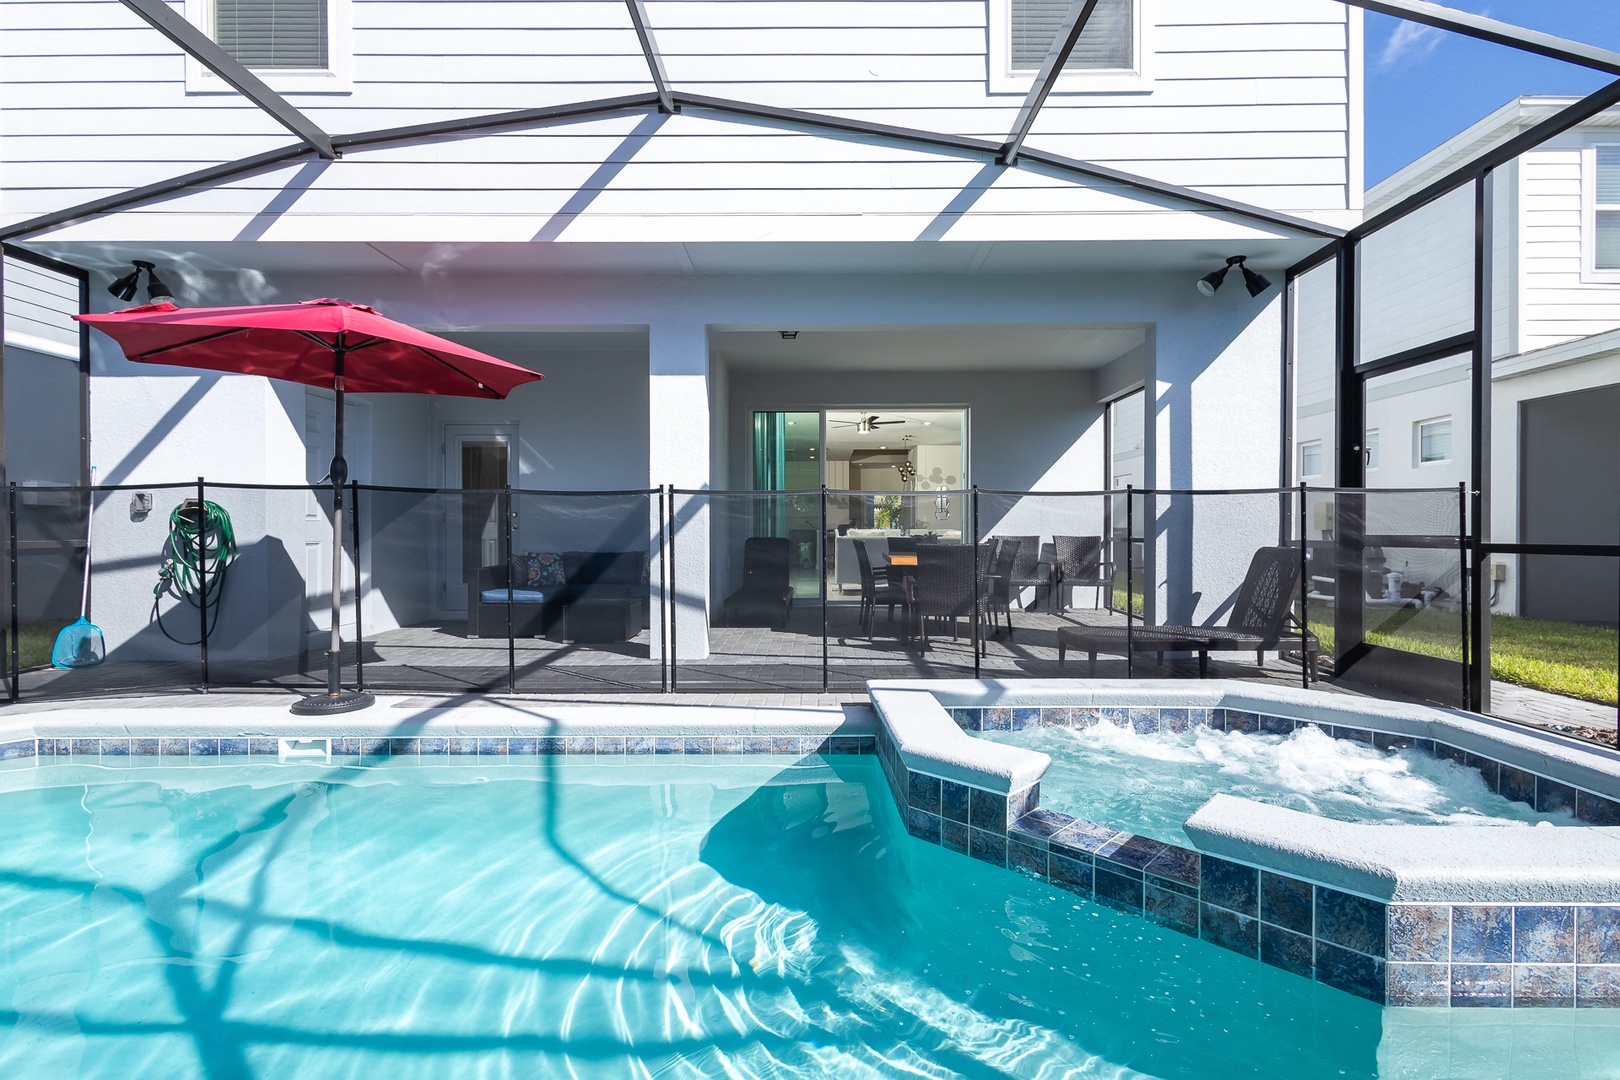 Soak your cares away in the hot tub or make a splash in the sparkling pool!